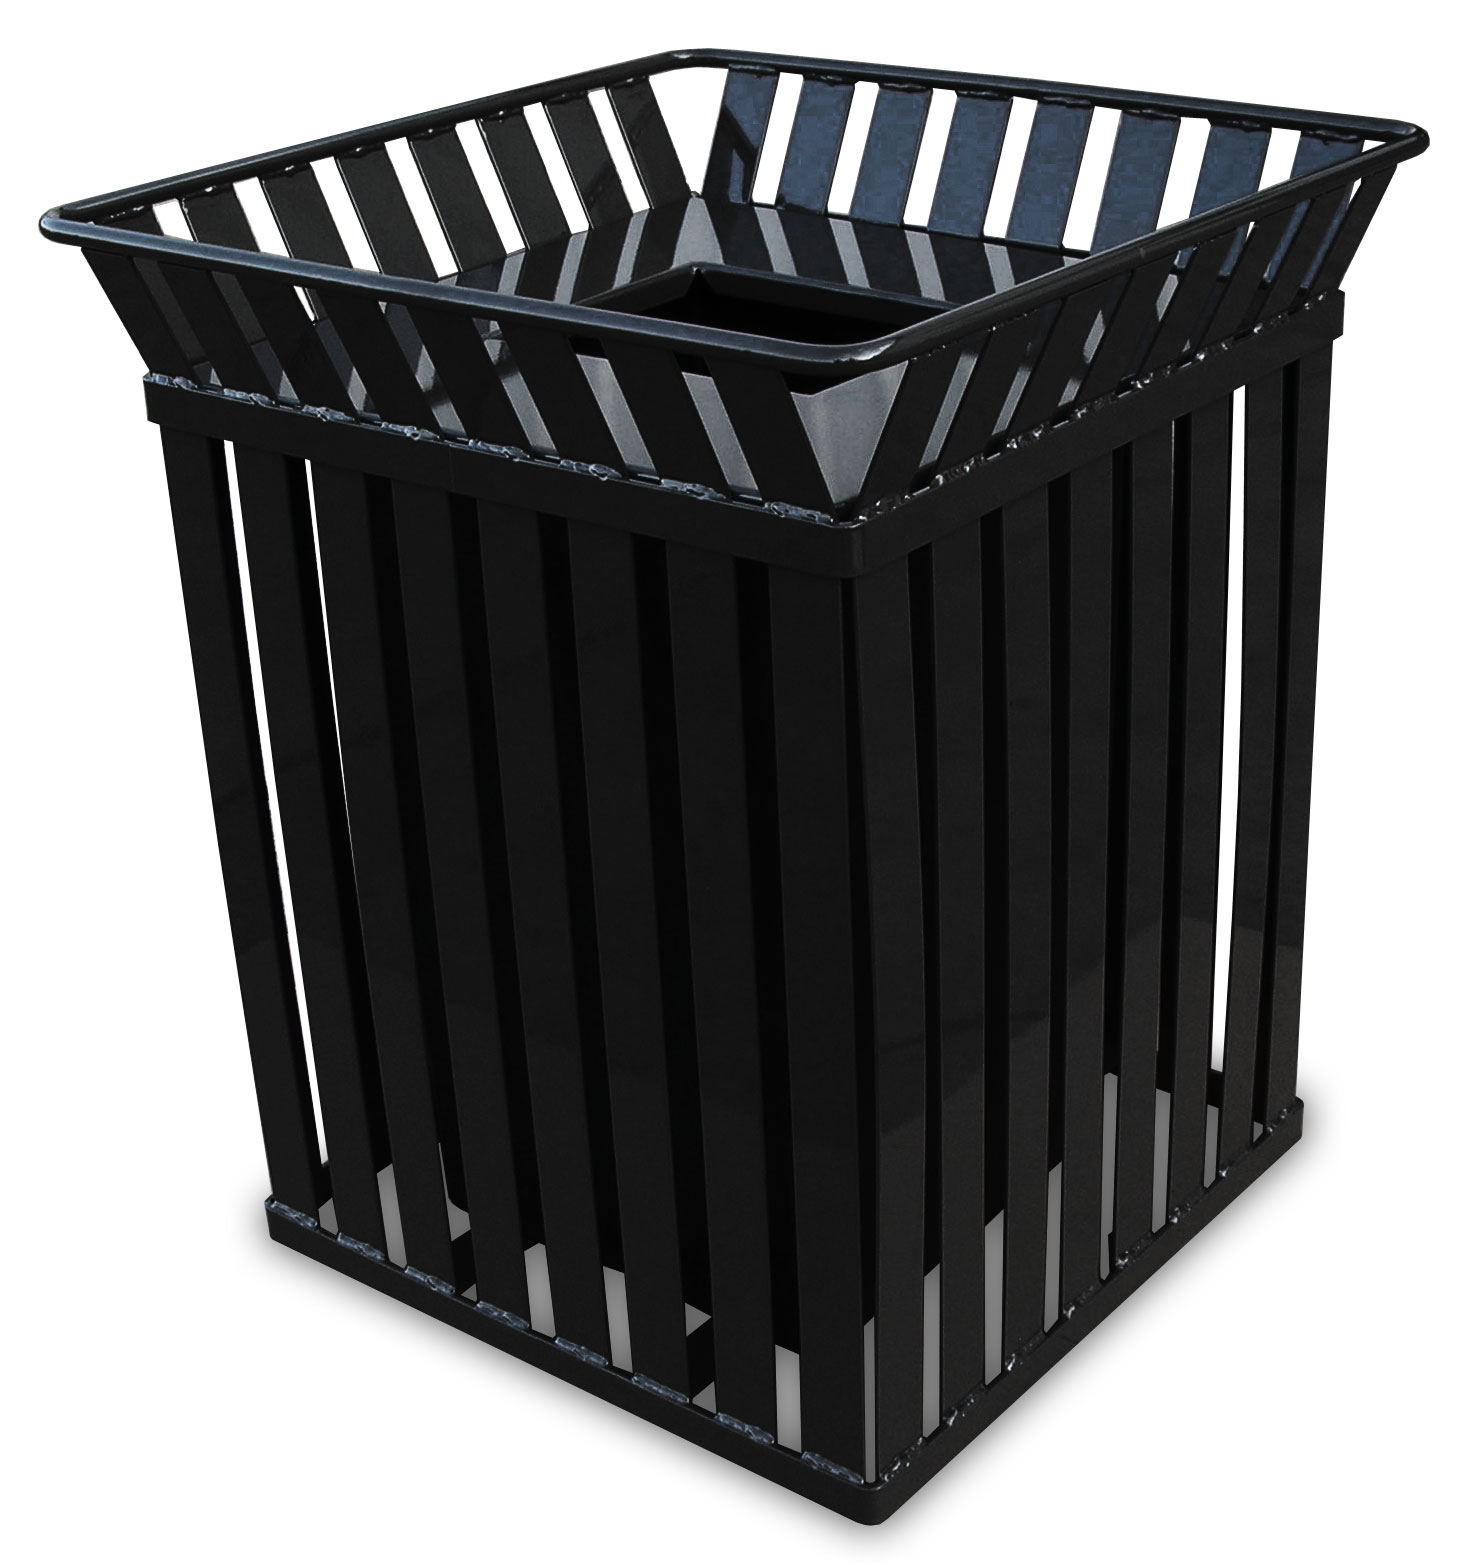 Trash receptacle with flat top, Outdoor